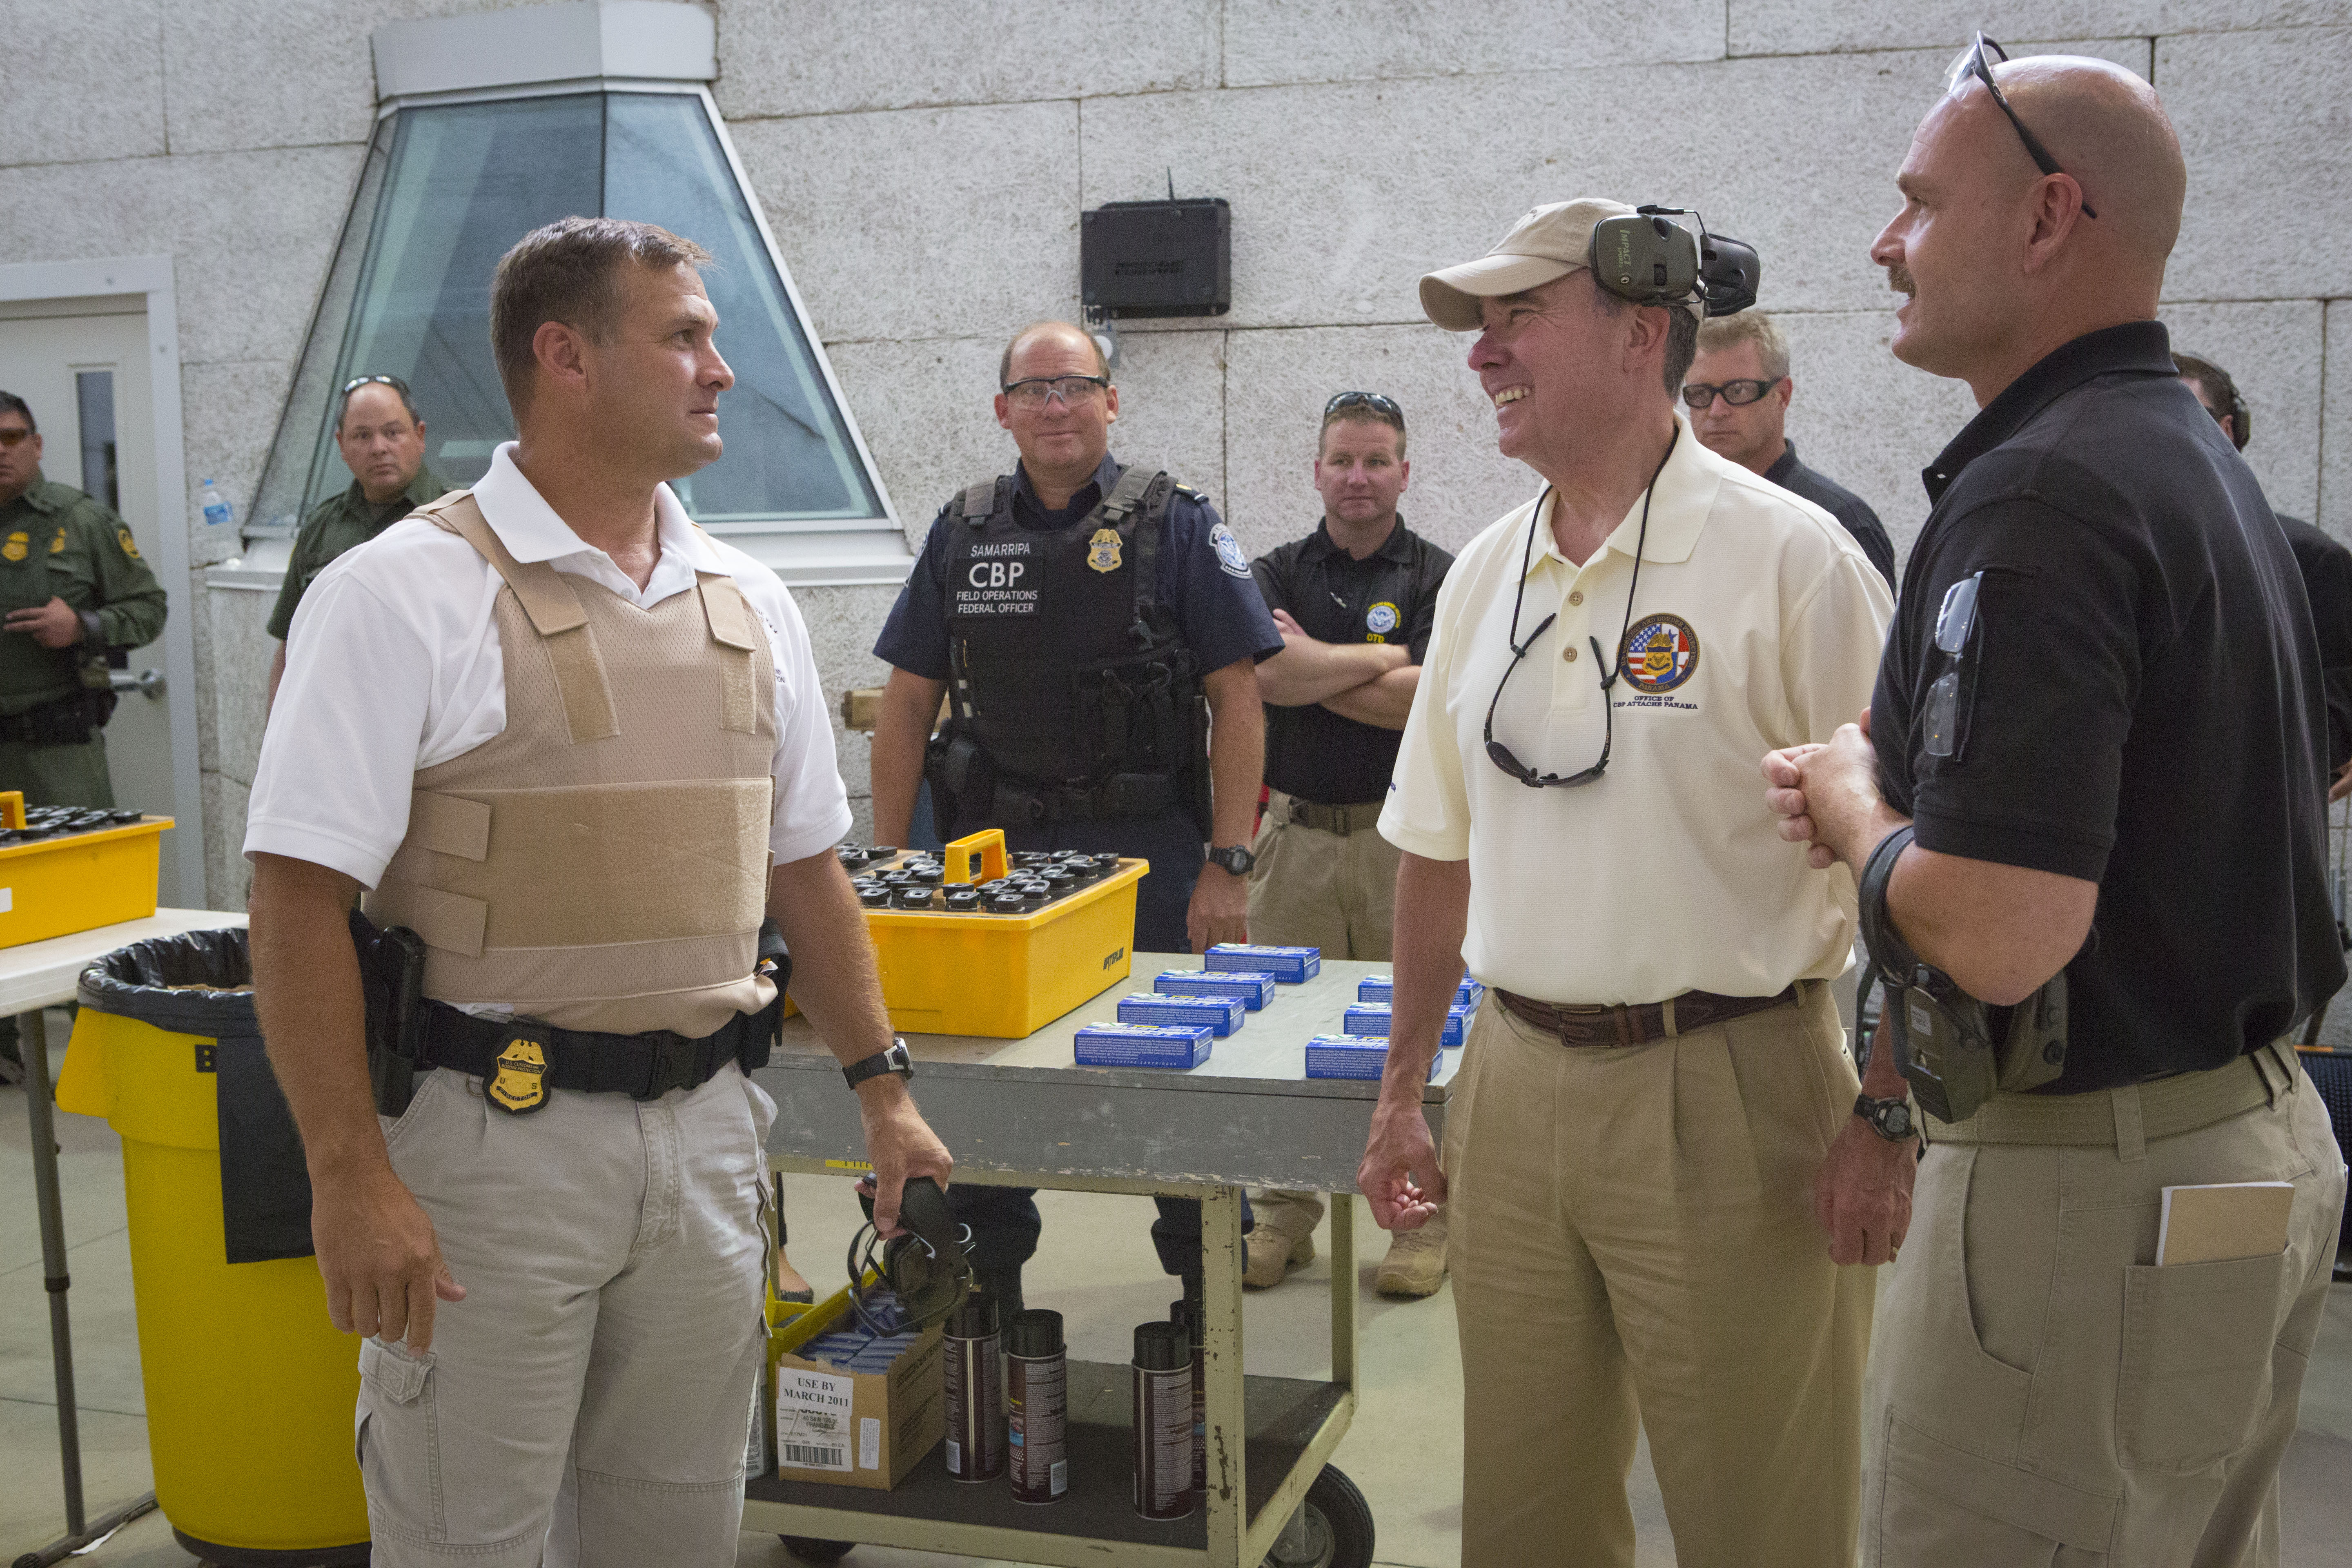 Commissioner Kerlikowske and CBP Advanced Training Center Assistant Director Dave Corolis, right, speak with Firearms Instructor Training Program participants at the center’s firing ranges in August.